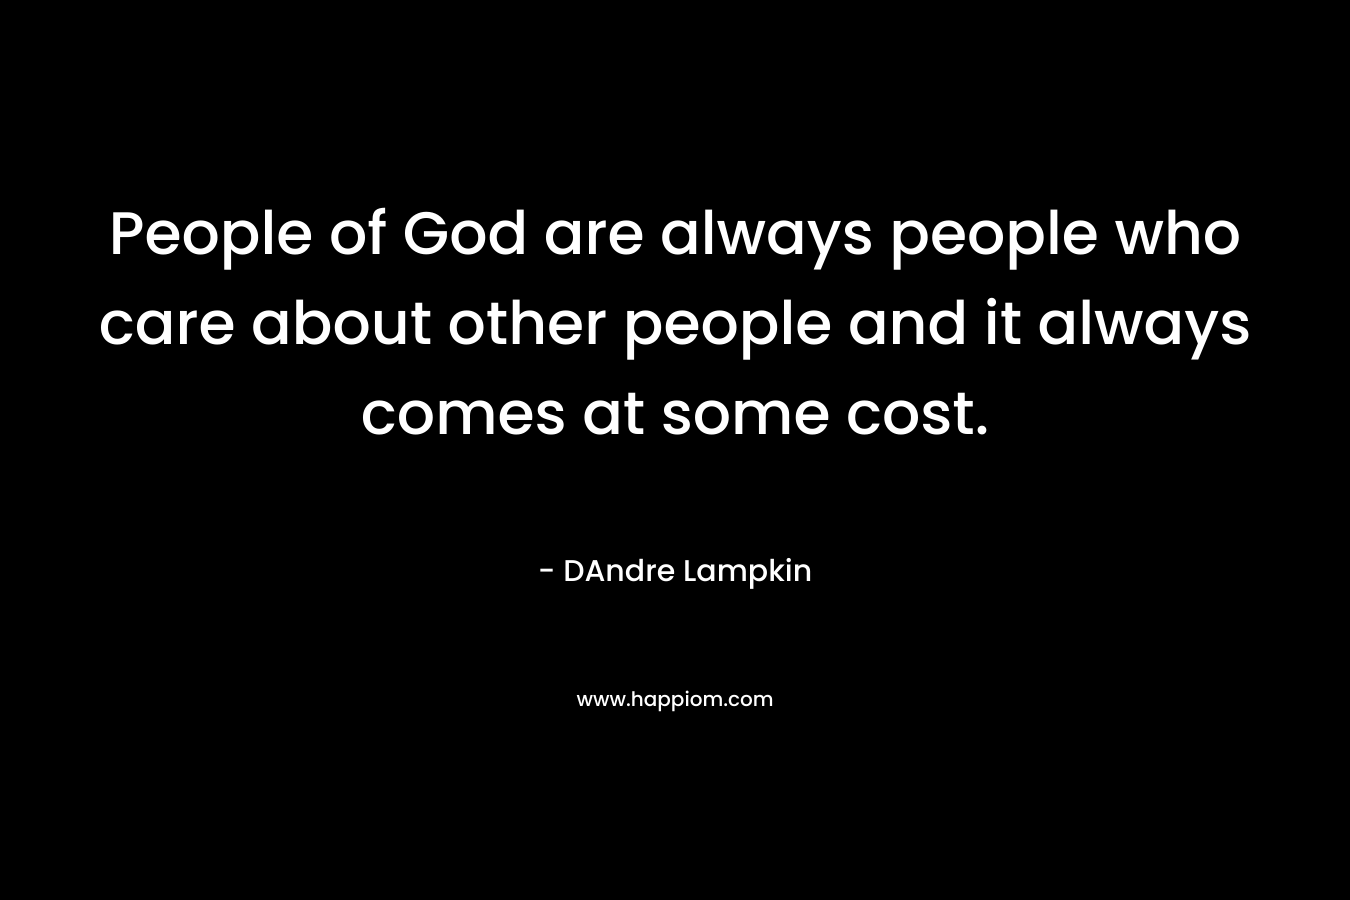 People of God are always people who care about other people and it always comes at some cost. – DAndre Lampkin